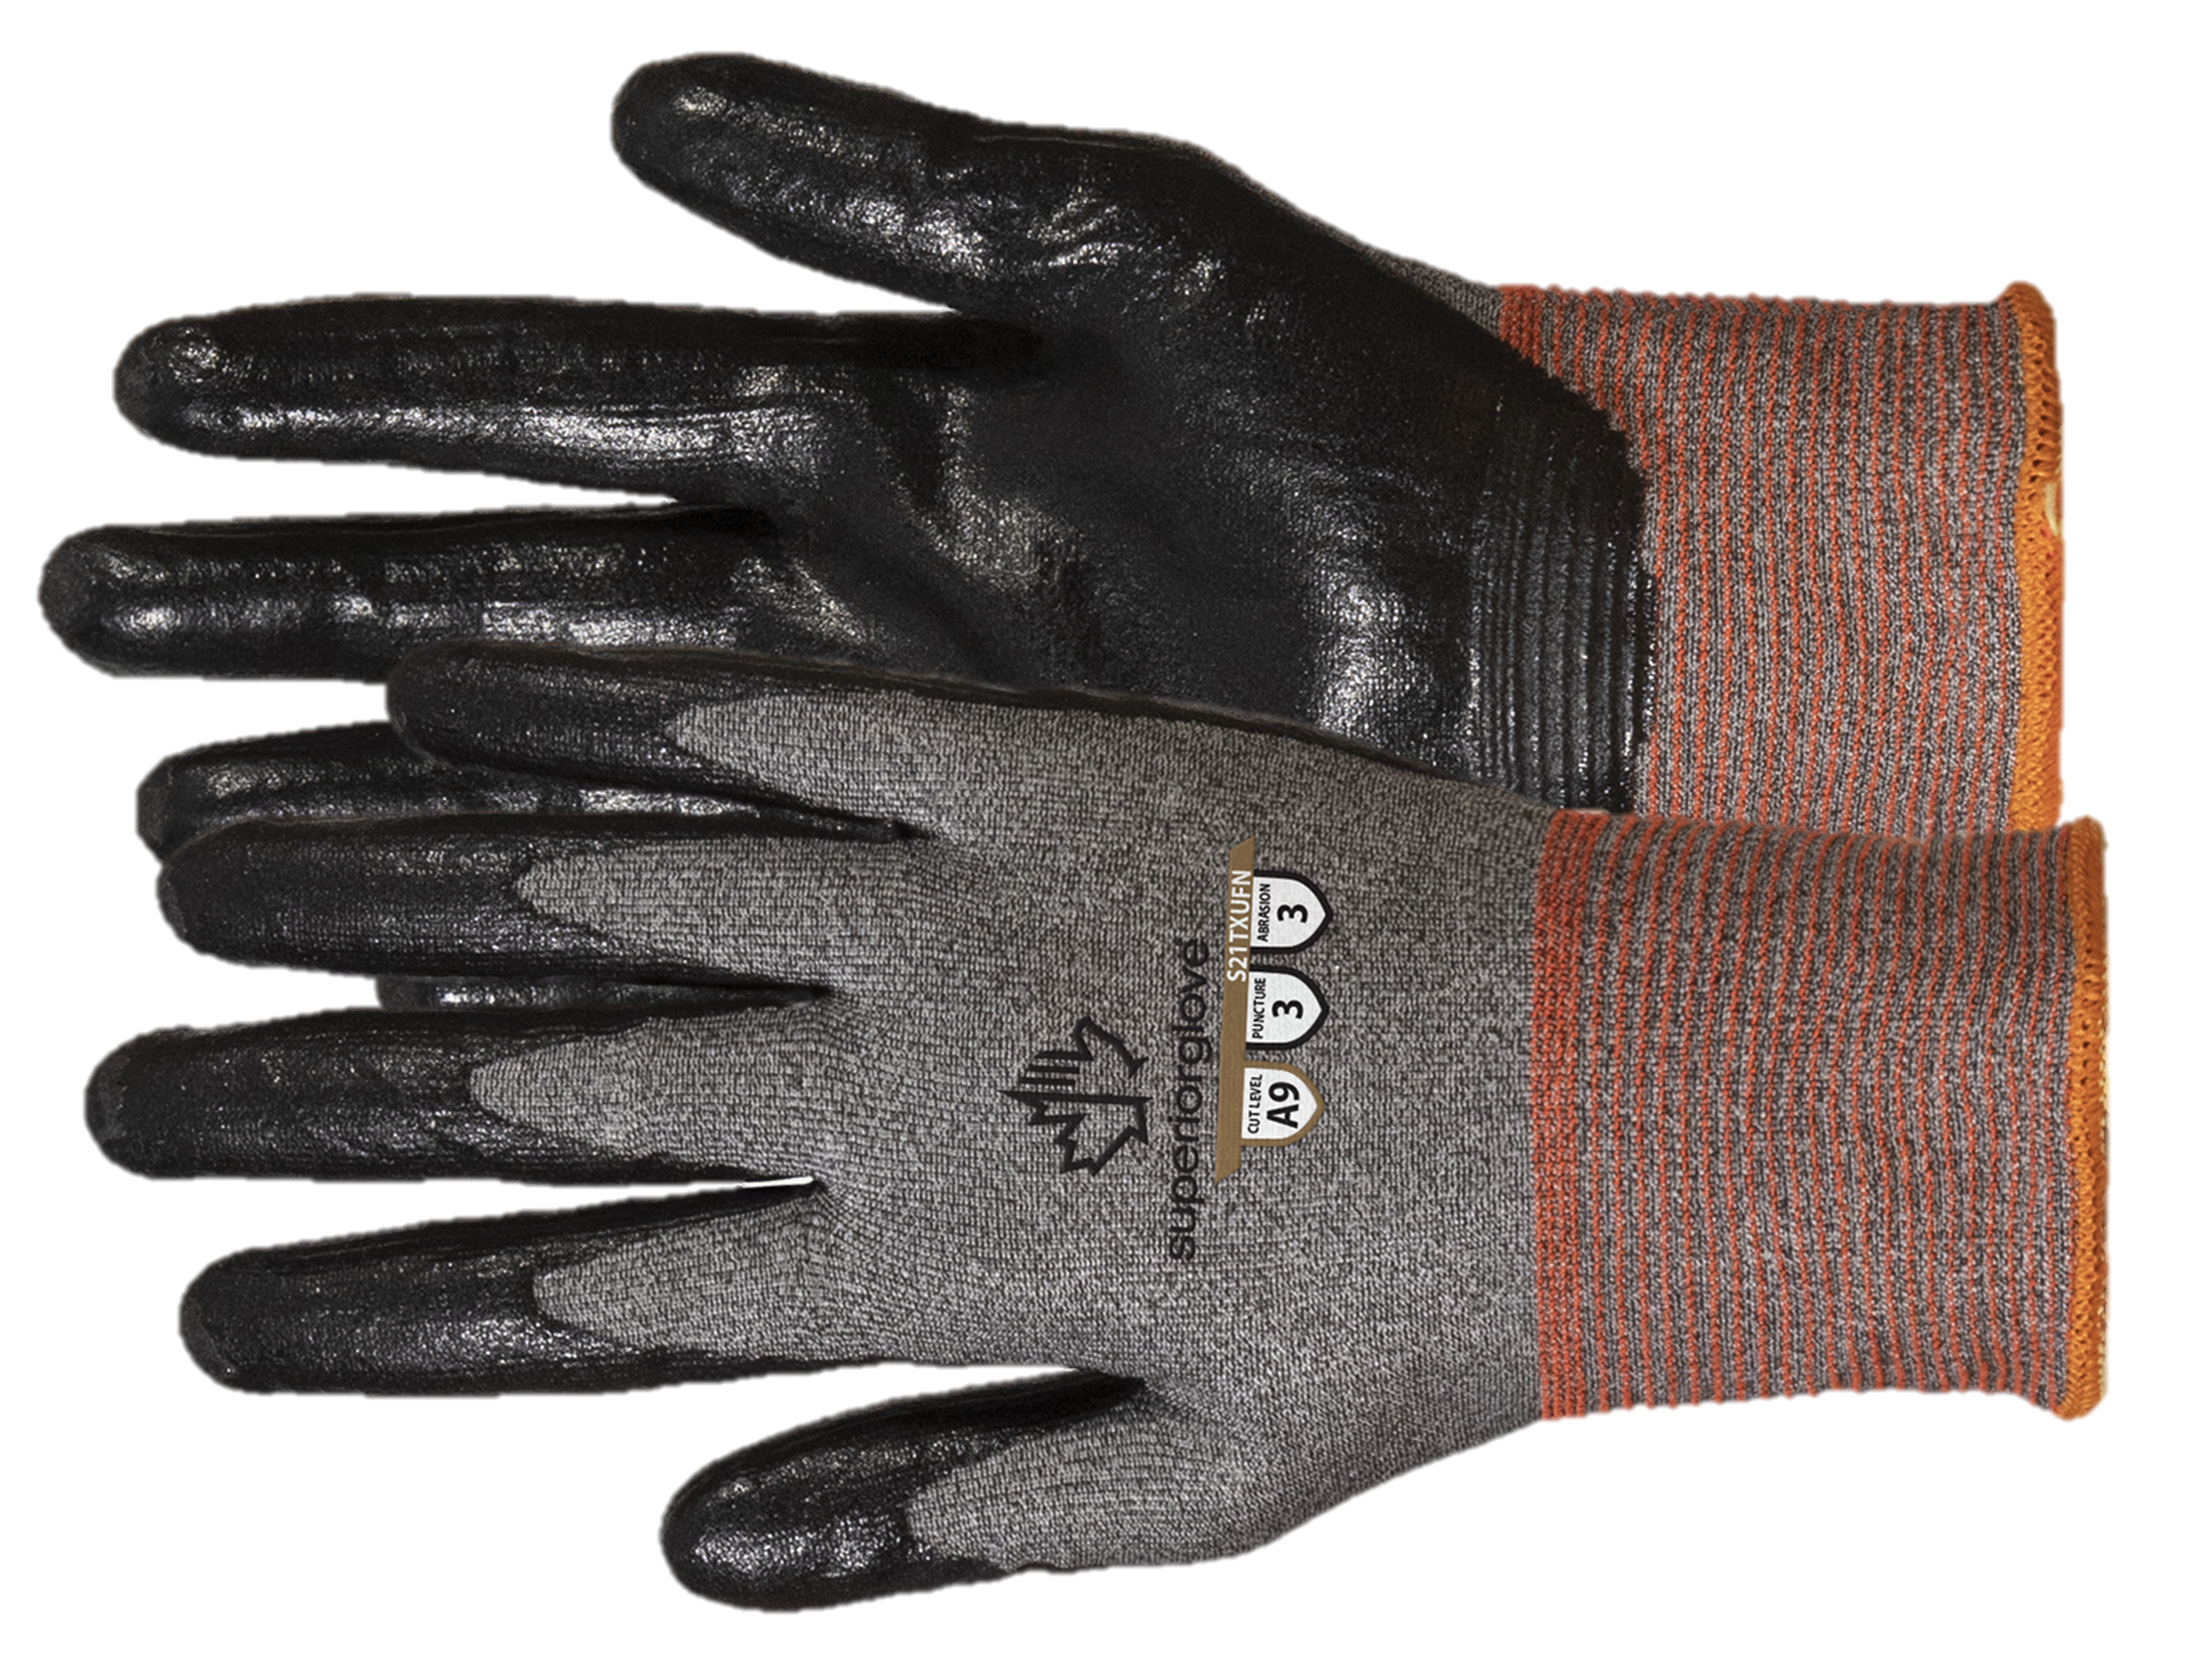 S21TXUFN -  Superior Glove® TenActiv™ 21-gauge Seamless Knit Nitrile Palm Coated Cut Level A9  Touchscreen Compatible Work Gloves